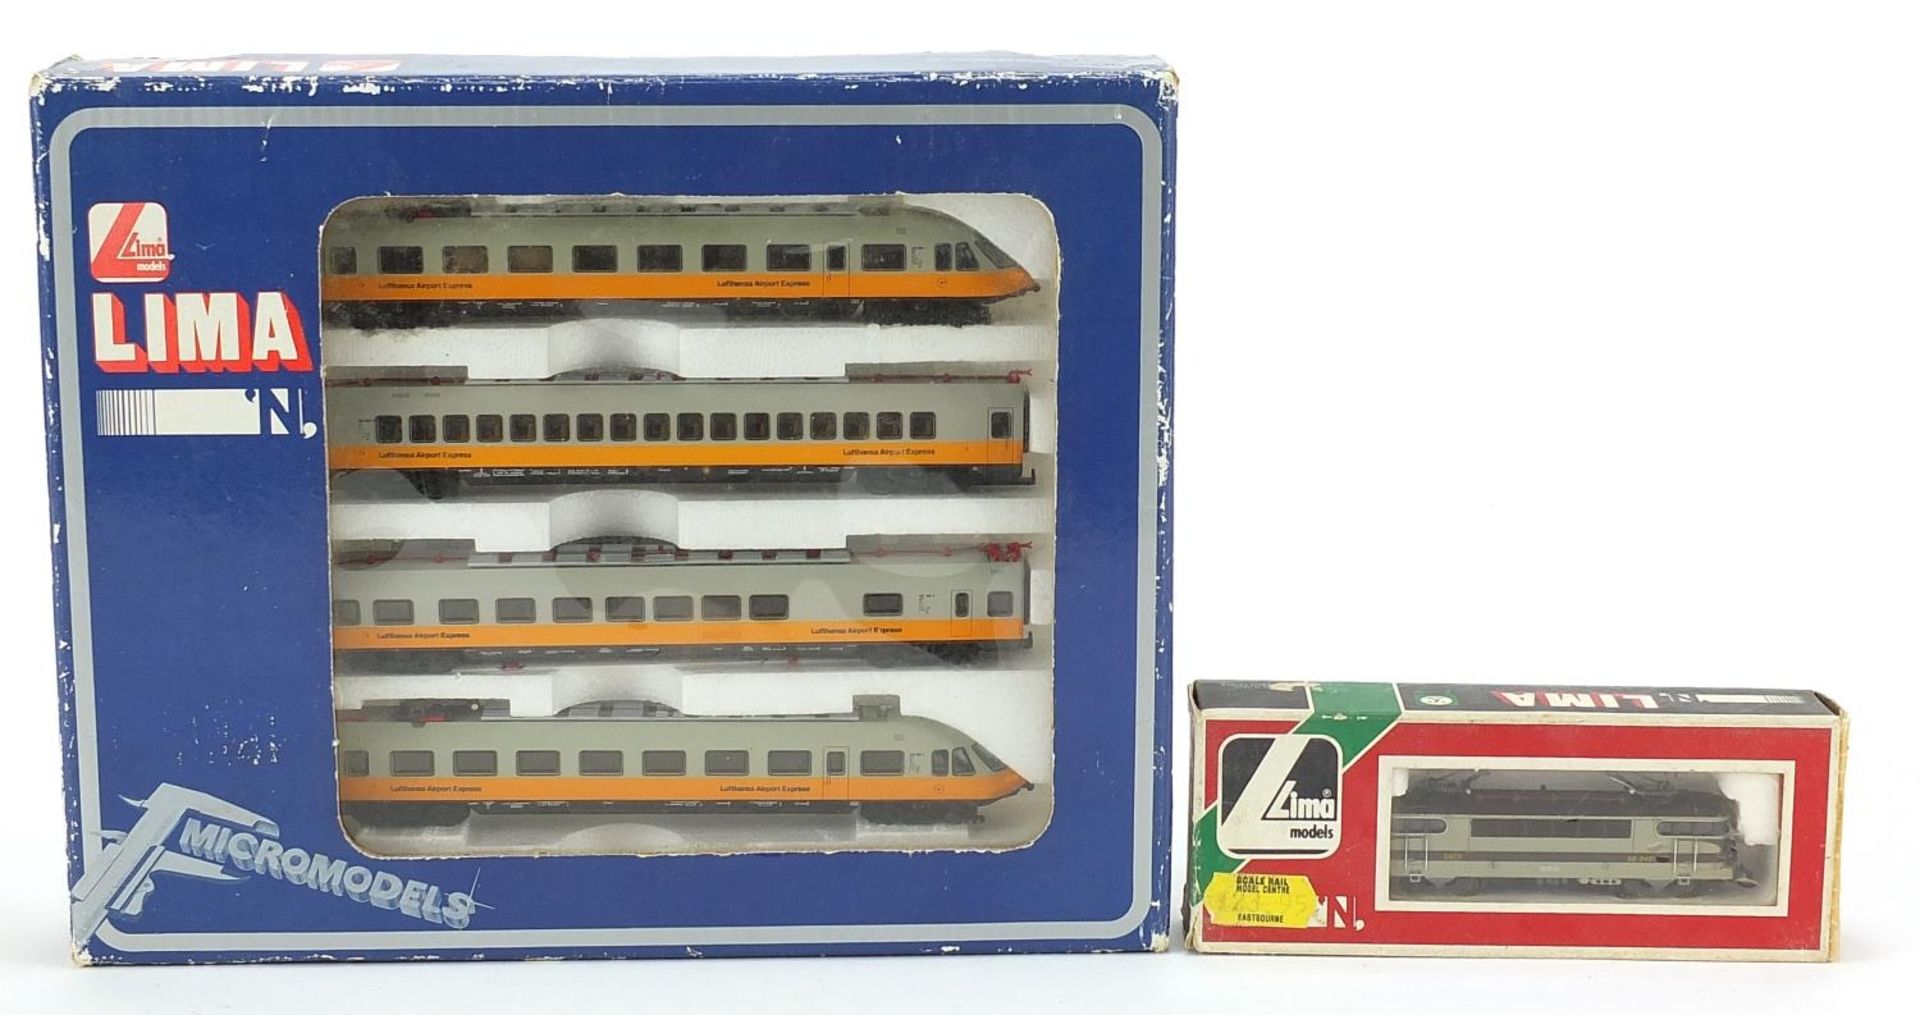 Lima N gauge model railway locomotive sets with boxes comprising four car numbered 163902 and